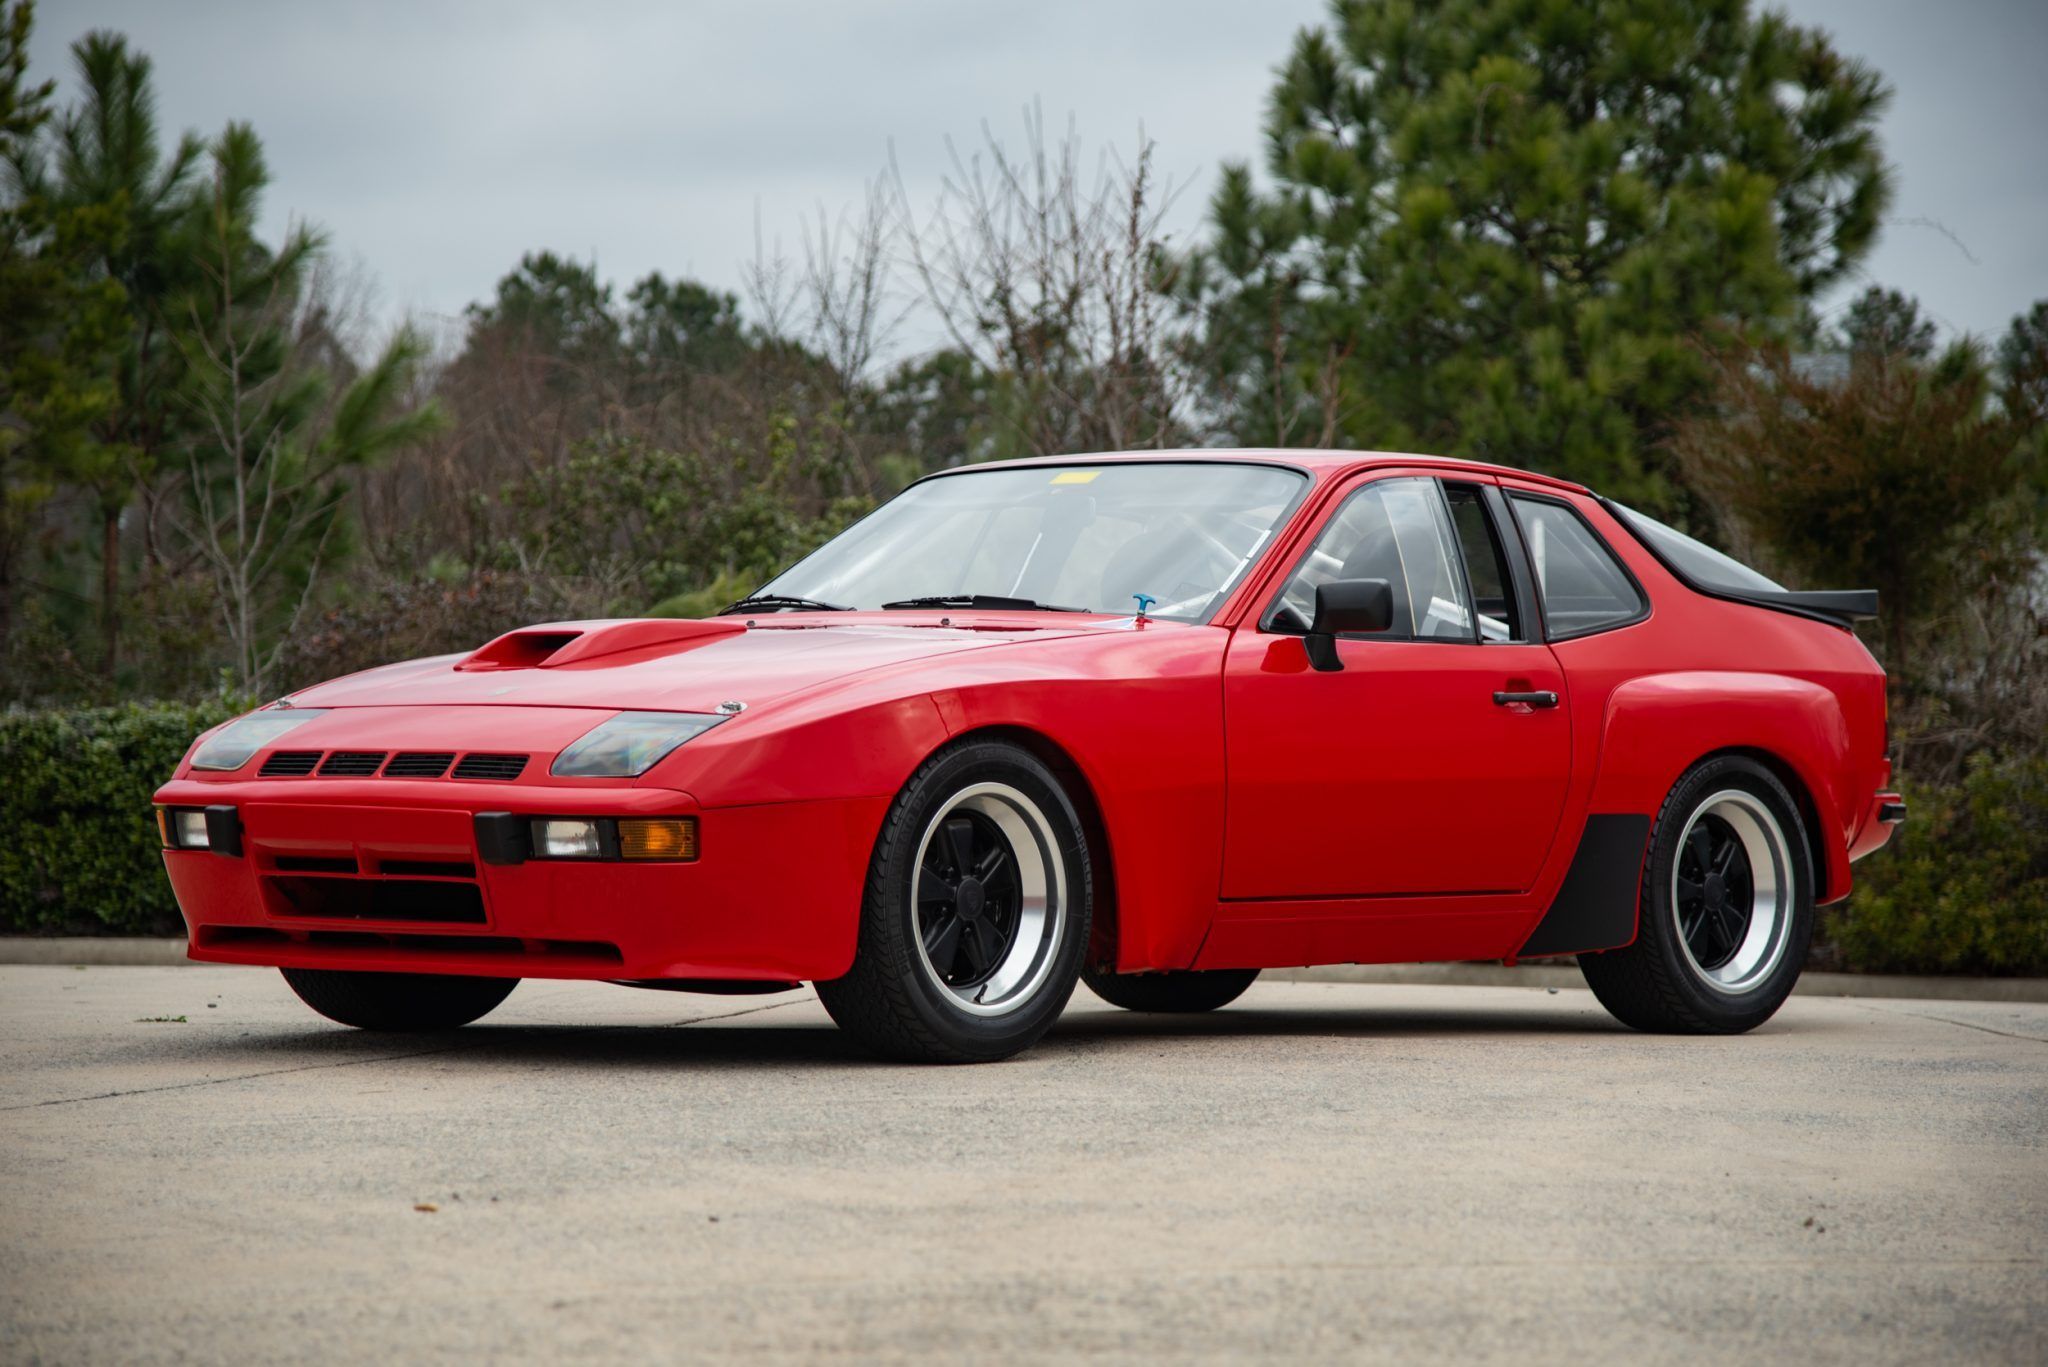 Someone Just Paid $261,000 for an Iconic 924